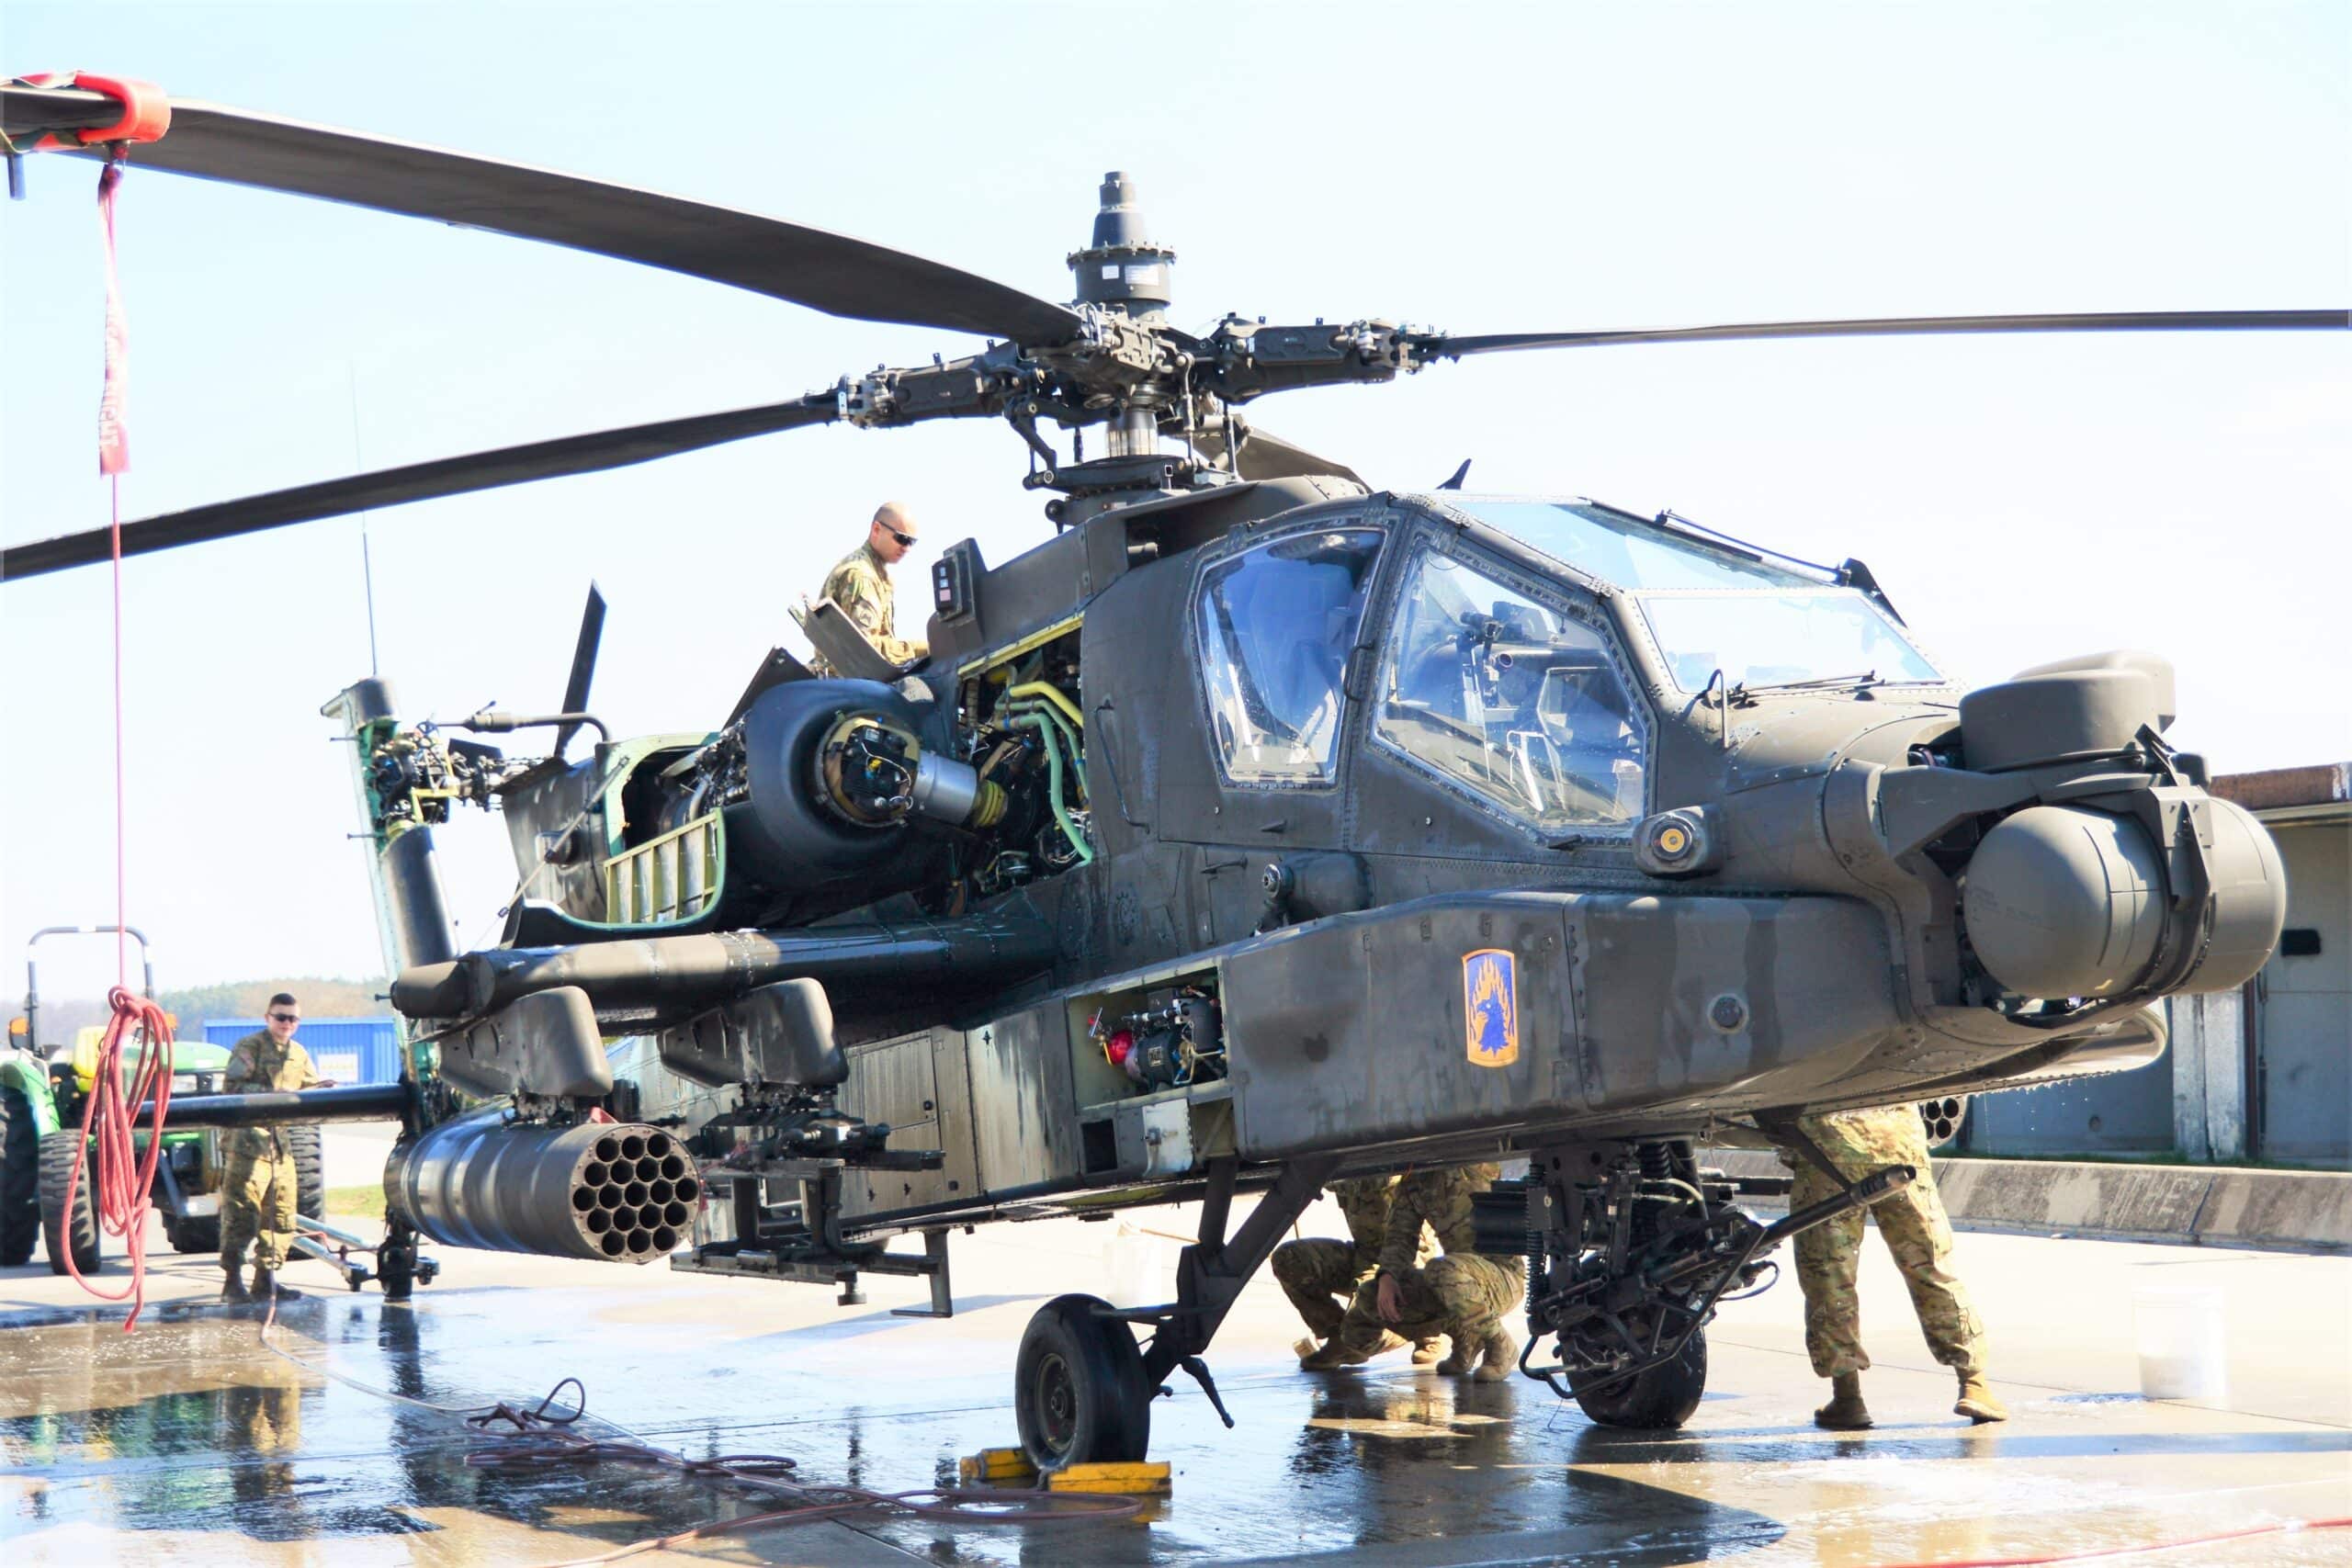 Apache helicopter being cleaned